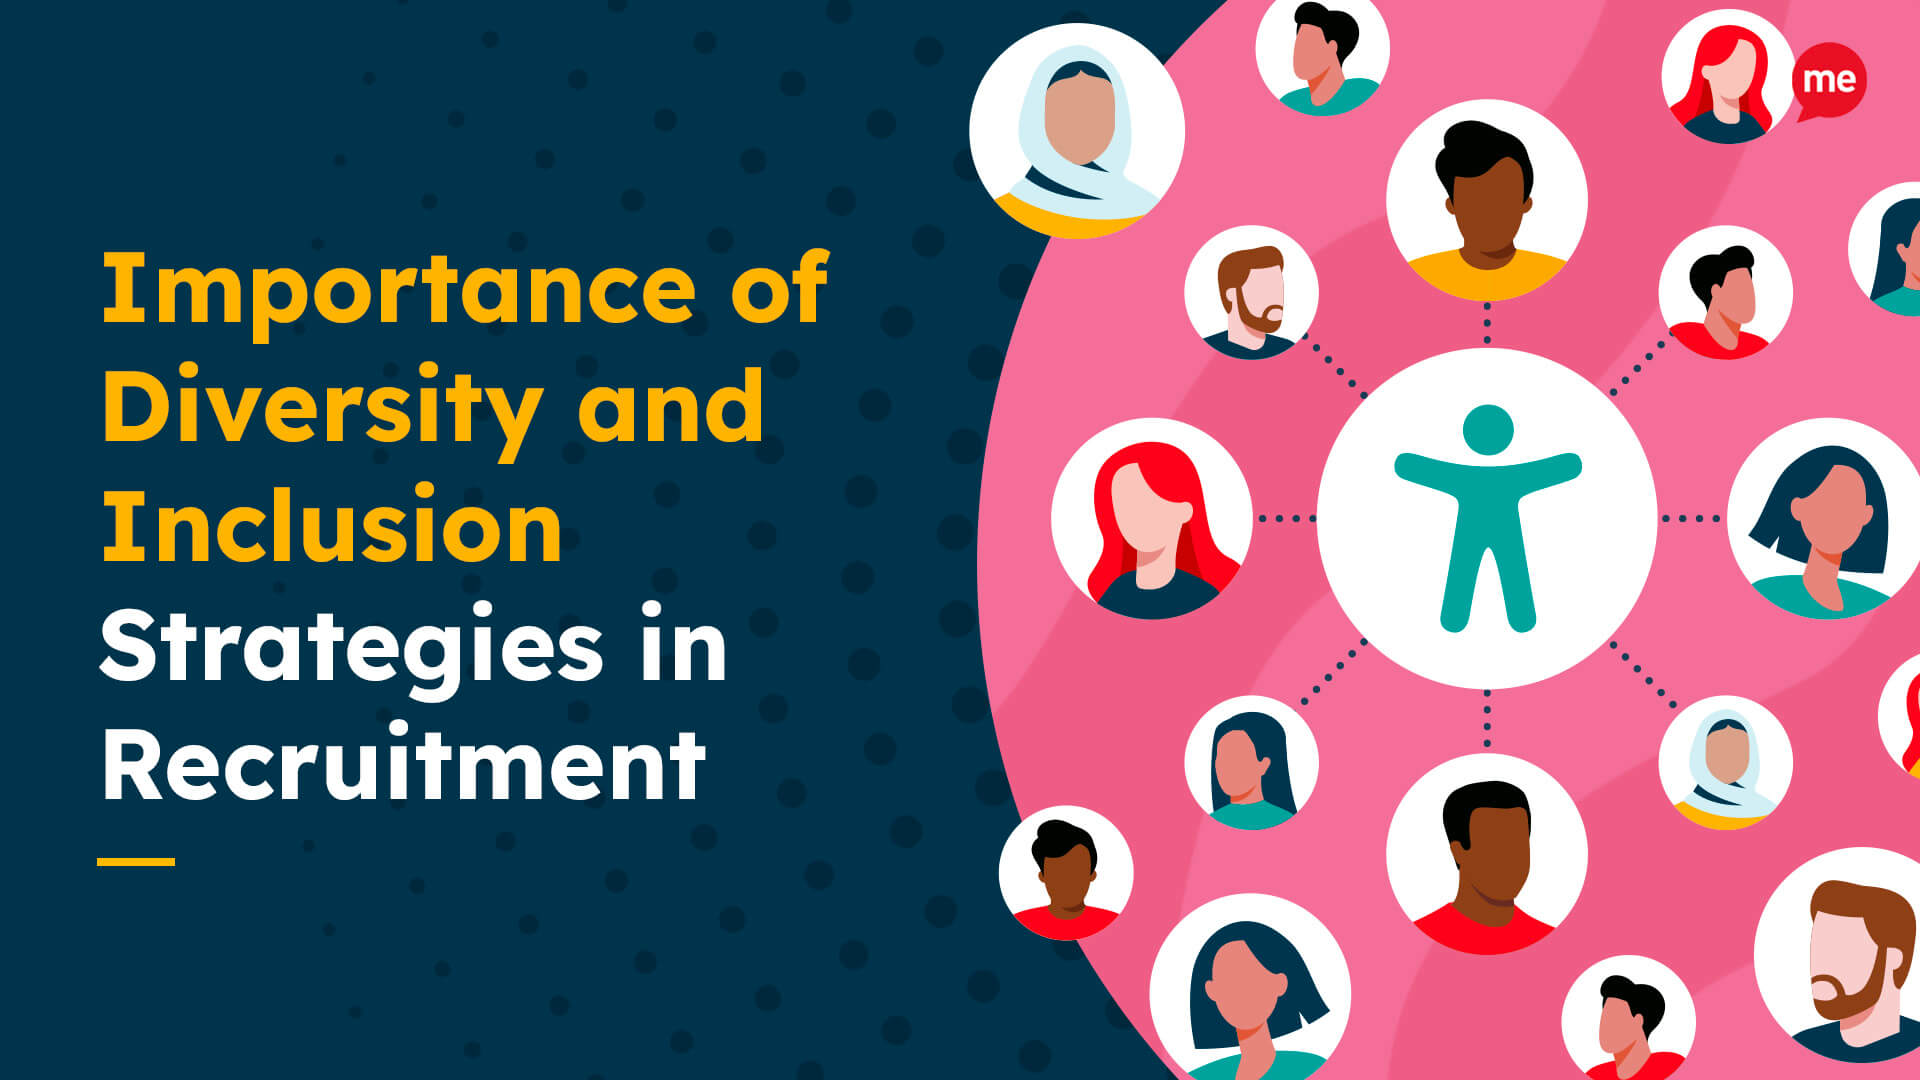 Importance of Diversity and Inclusion Strategies in Recruitment